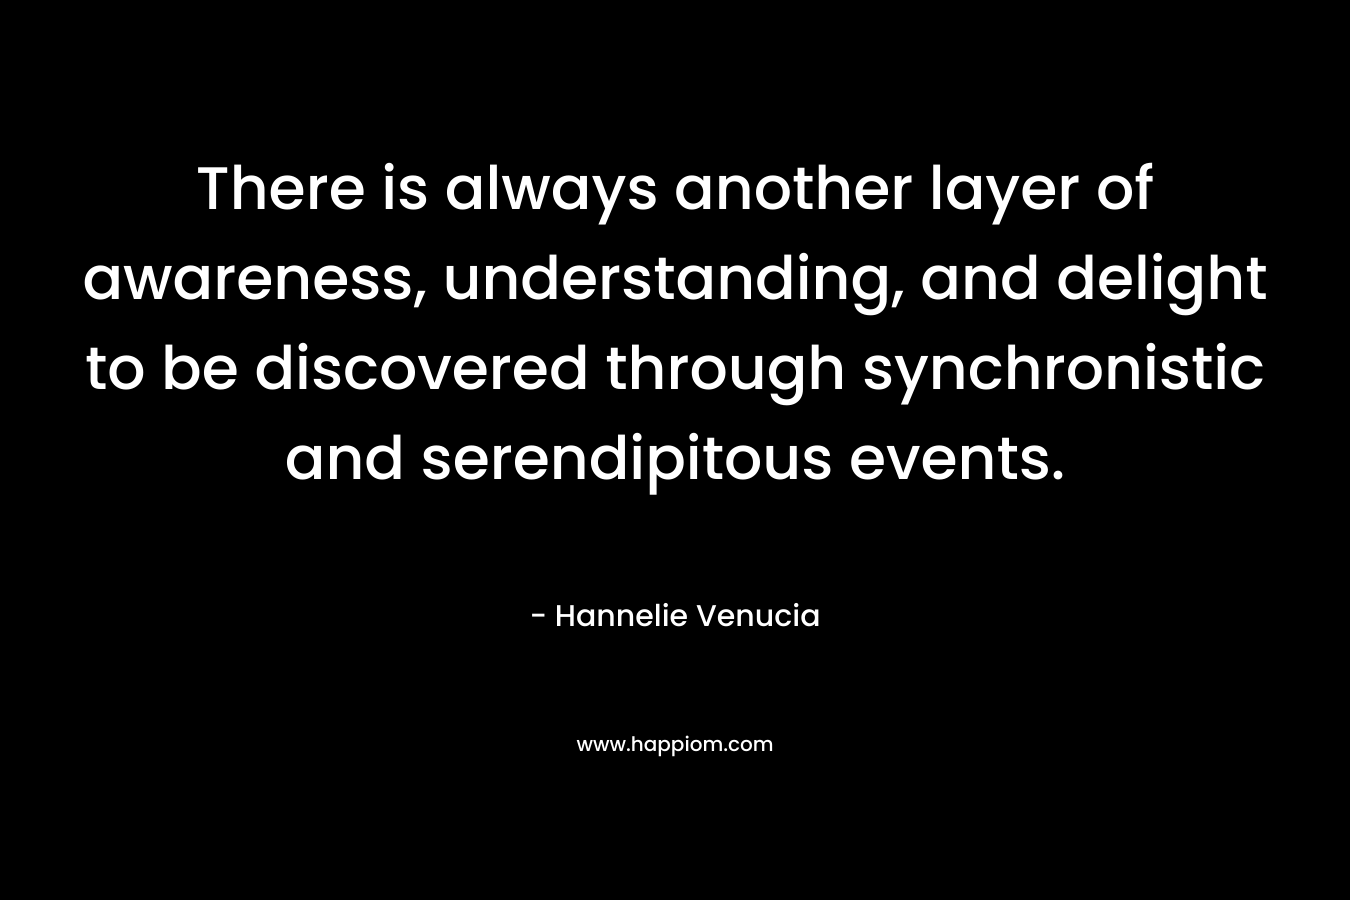 There is always another layer of awareness, understanding, and delight to be discovered through synchronistic and serendipitous events. – Hannelie Venucia